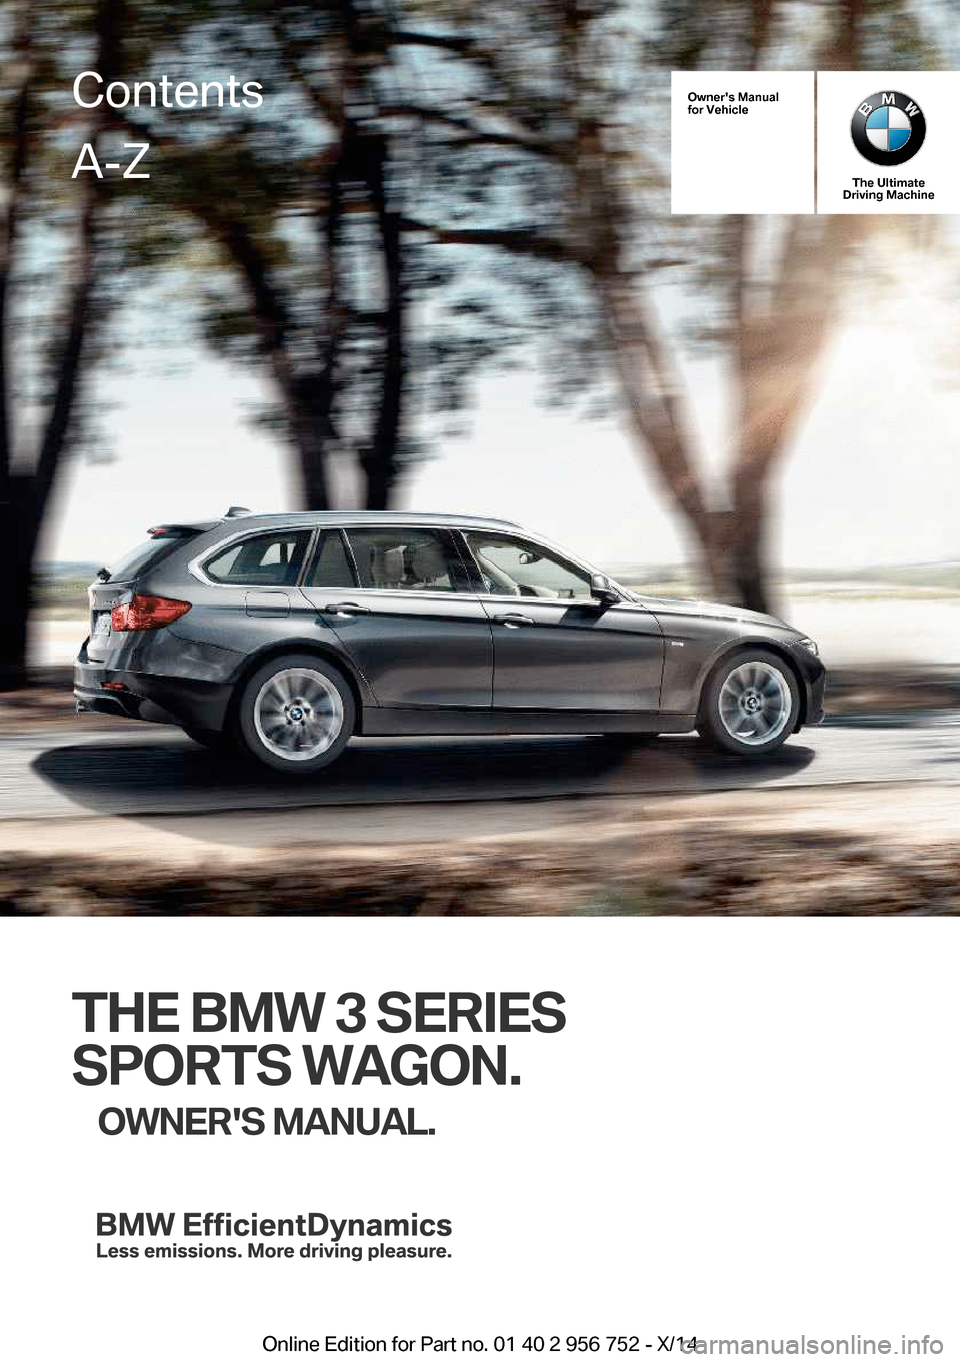 BMW 3 SERIES SPORTS WAGON 2014 F31 Owners Manual Owners Manual
for Vehicle
The Ultimate
Driving Machine
THE BMW 3 SERIES
SPORTS WAGON. OWNERS MANUAL.
ContentsA-Z
Online Edition for Part no. 01 40 2 956 752 - X/14   